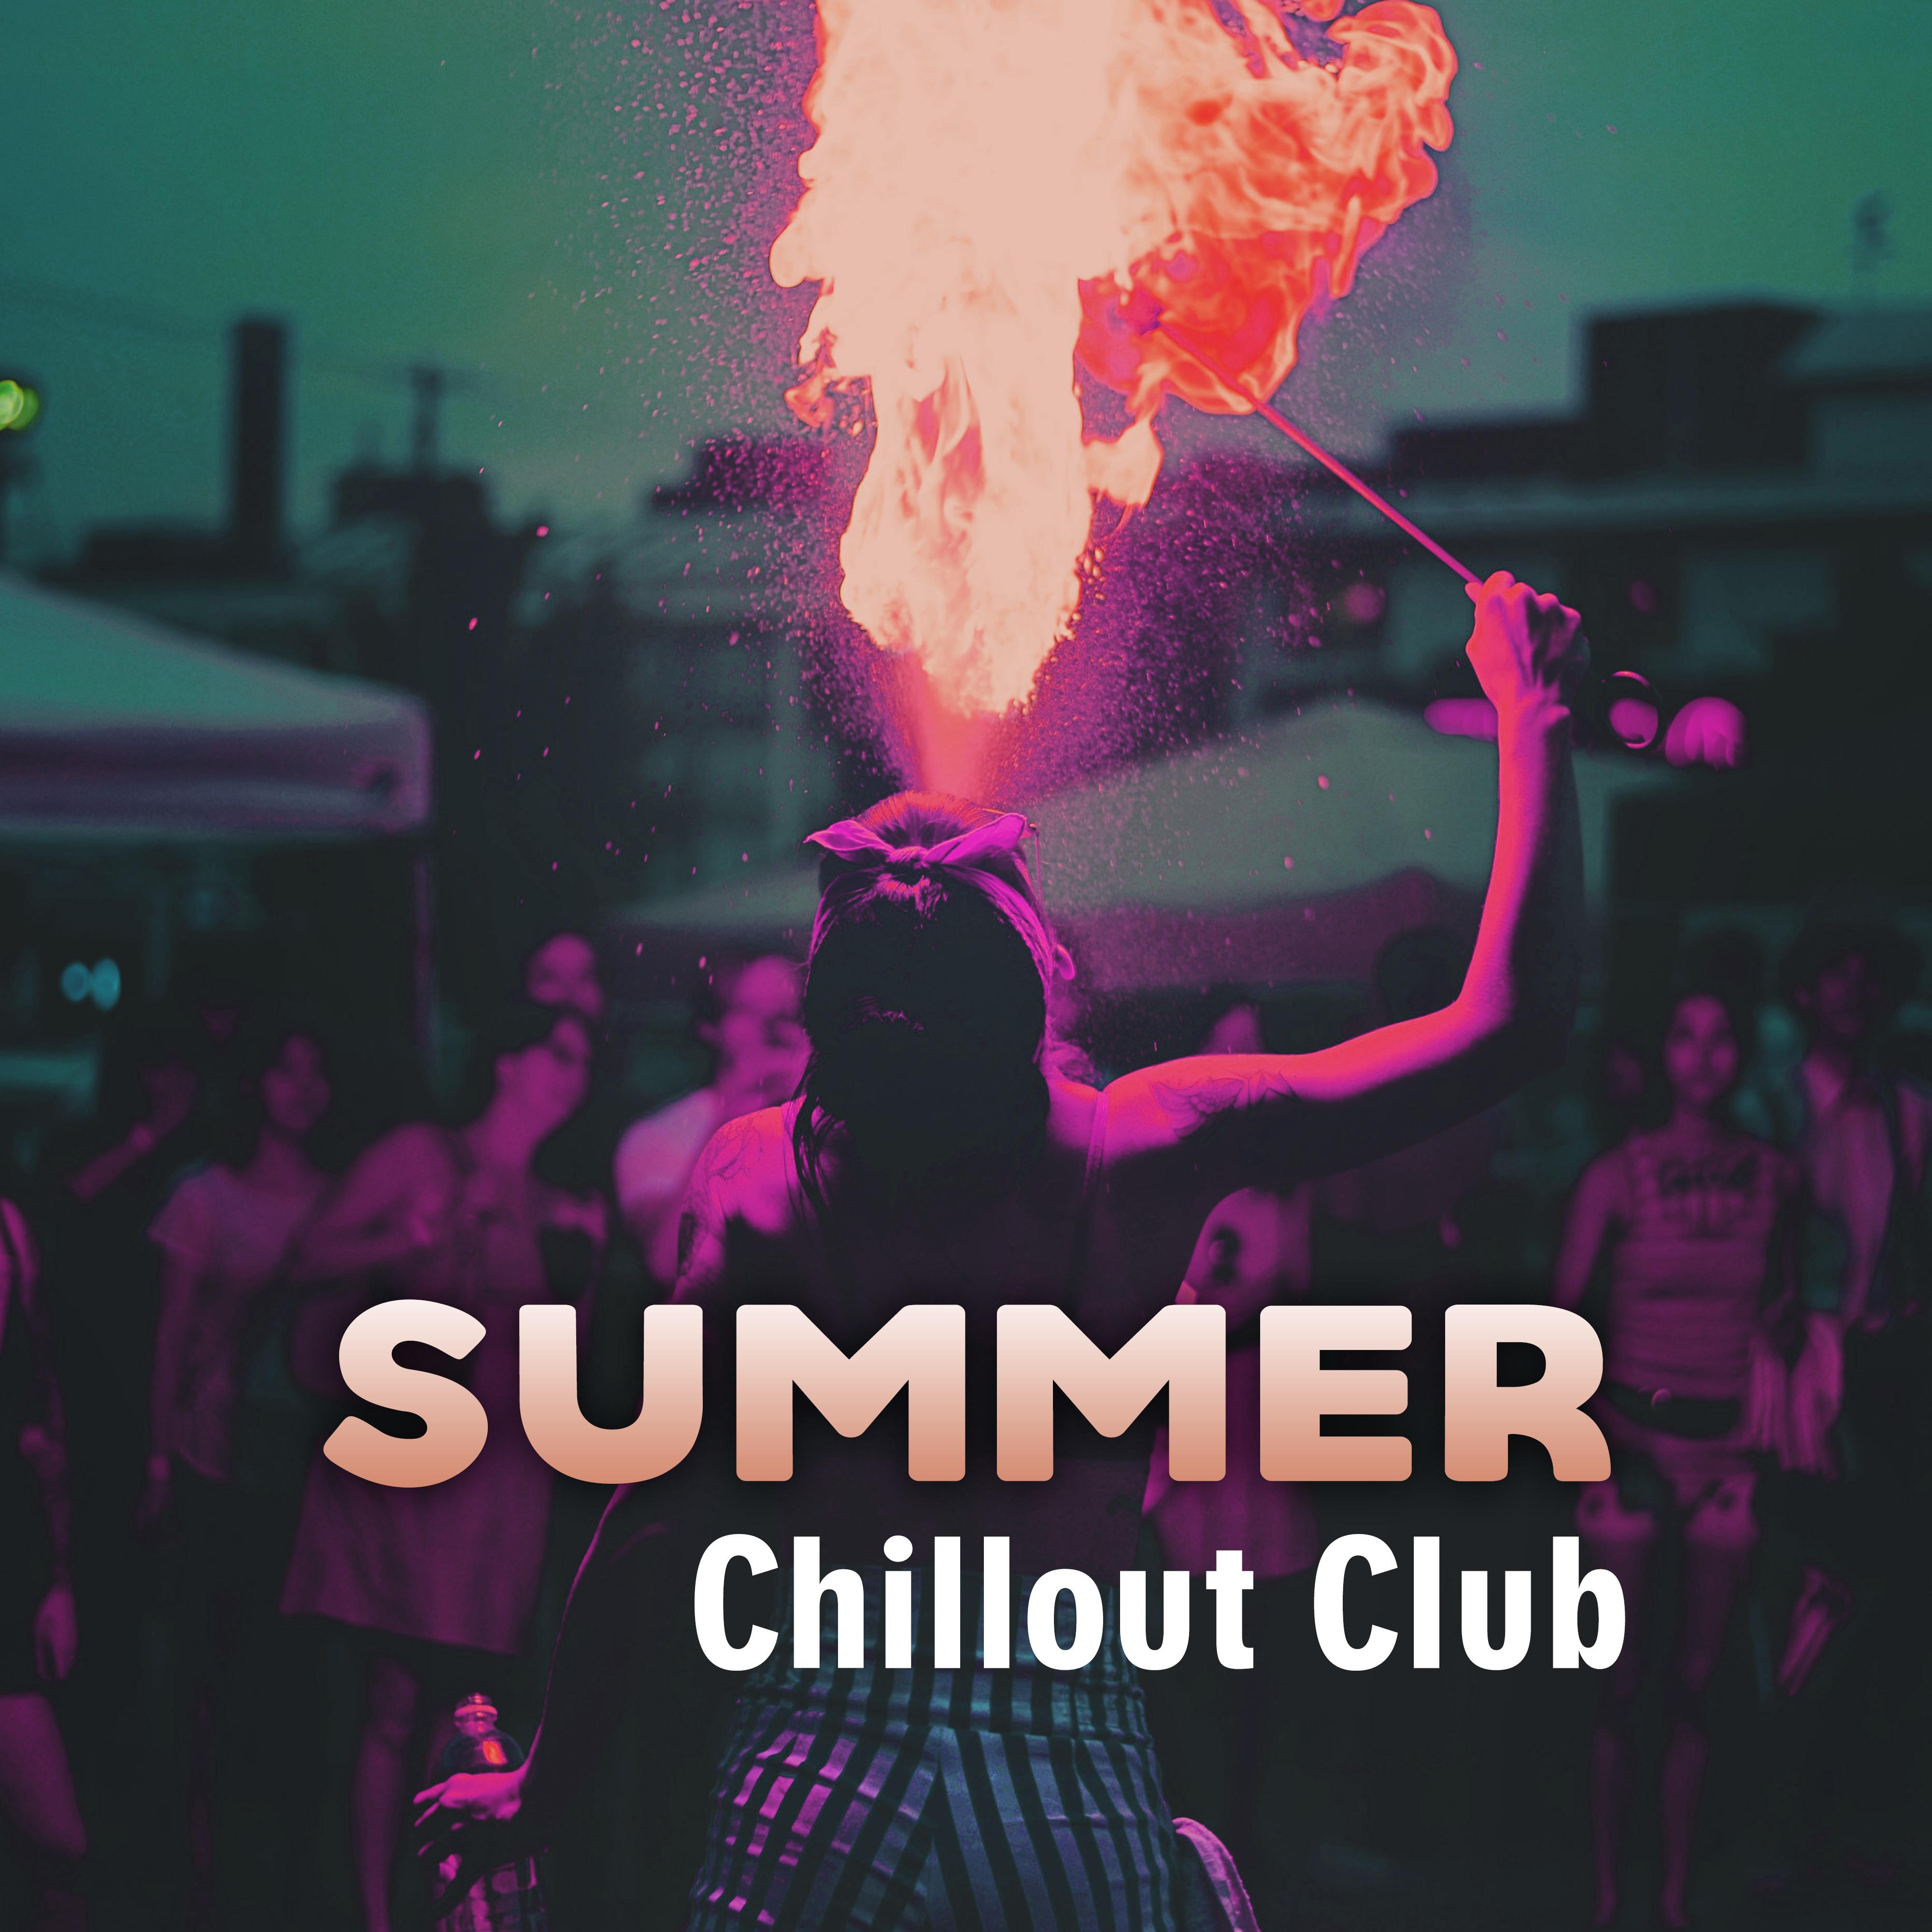 Summer Chillout Club  Chill Out 2017, Ibiza, Beach Party, Holiday Music, Relax, Summer Soltice